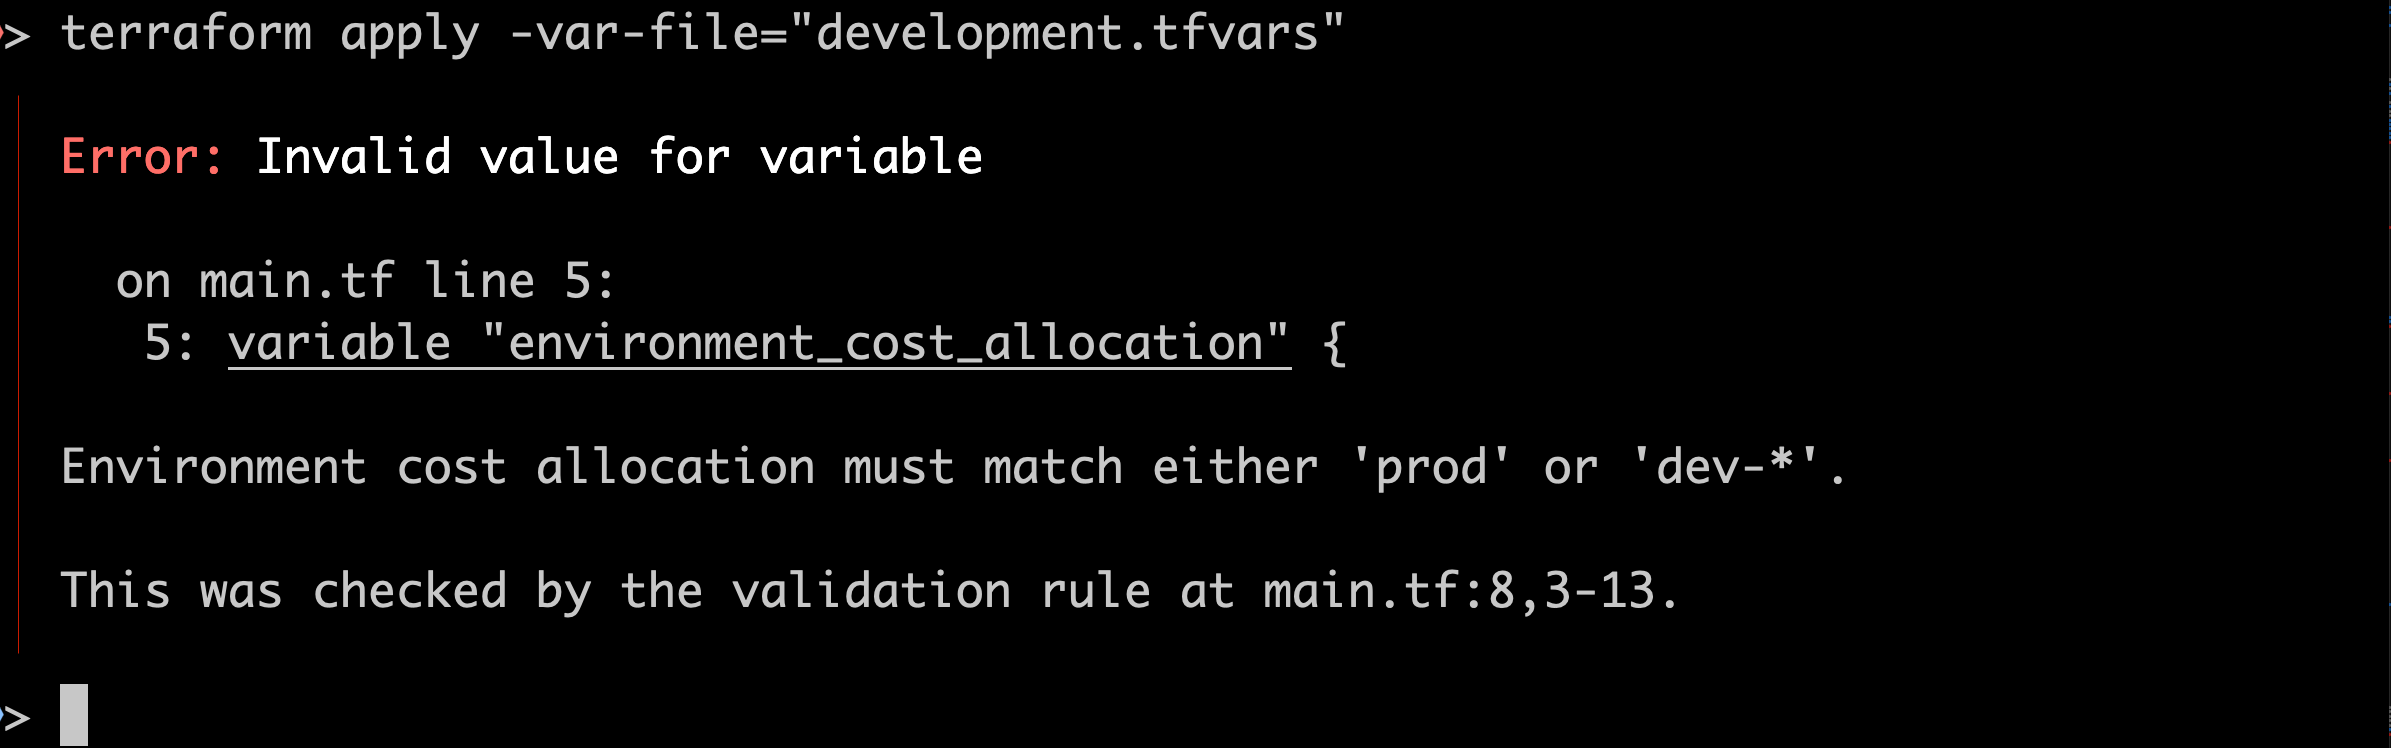 An error from terraform plan stating Environment can either be prod or dev for cost tracking purposes